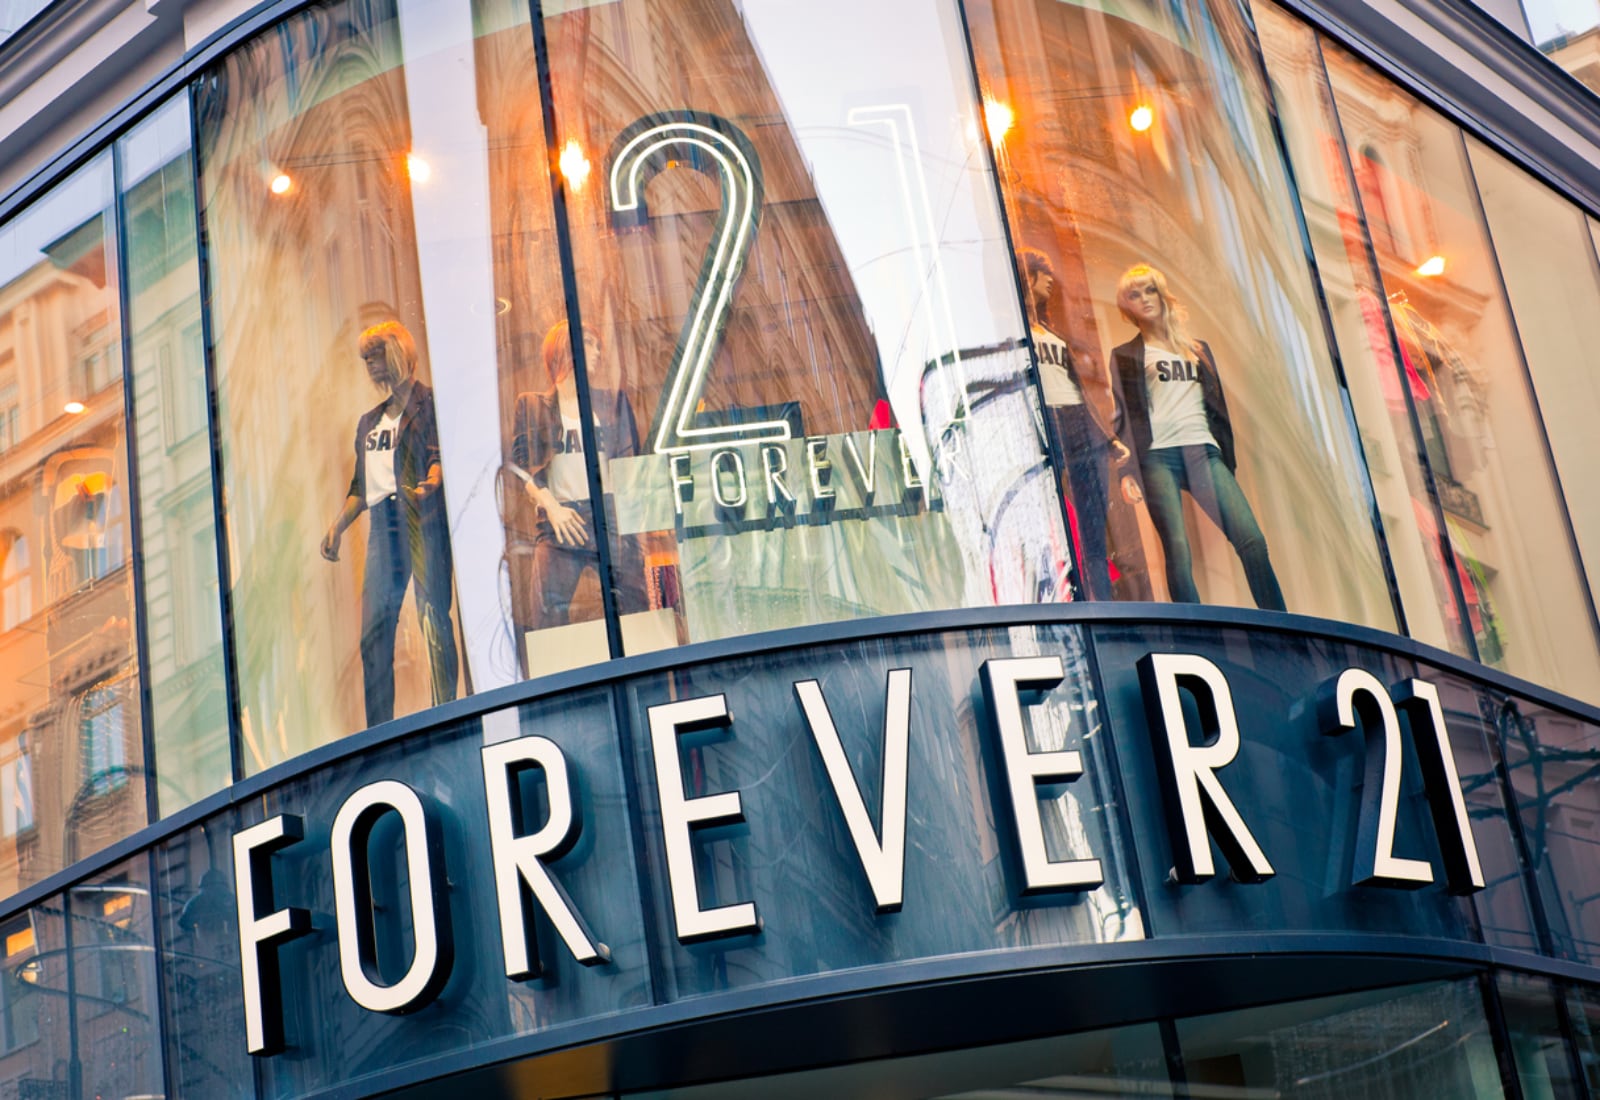 Forever 21 to pull out of Japan by late October - The Japan Times